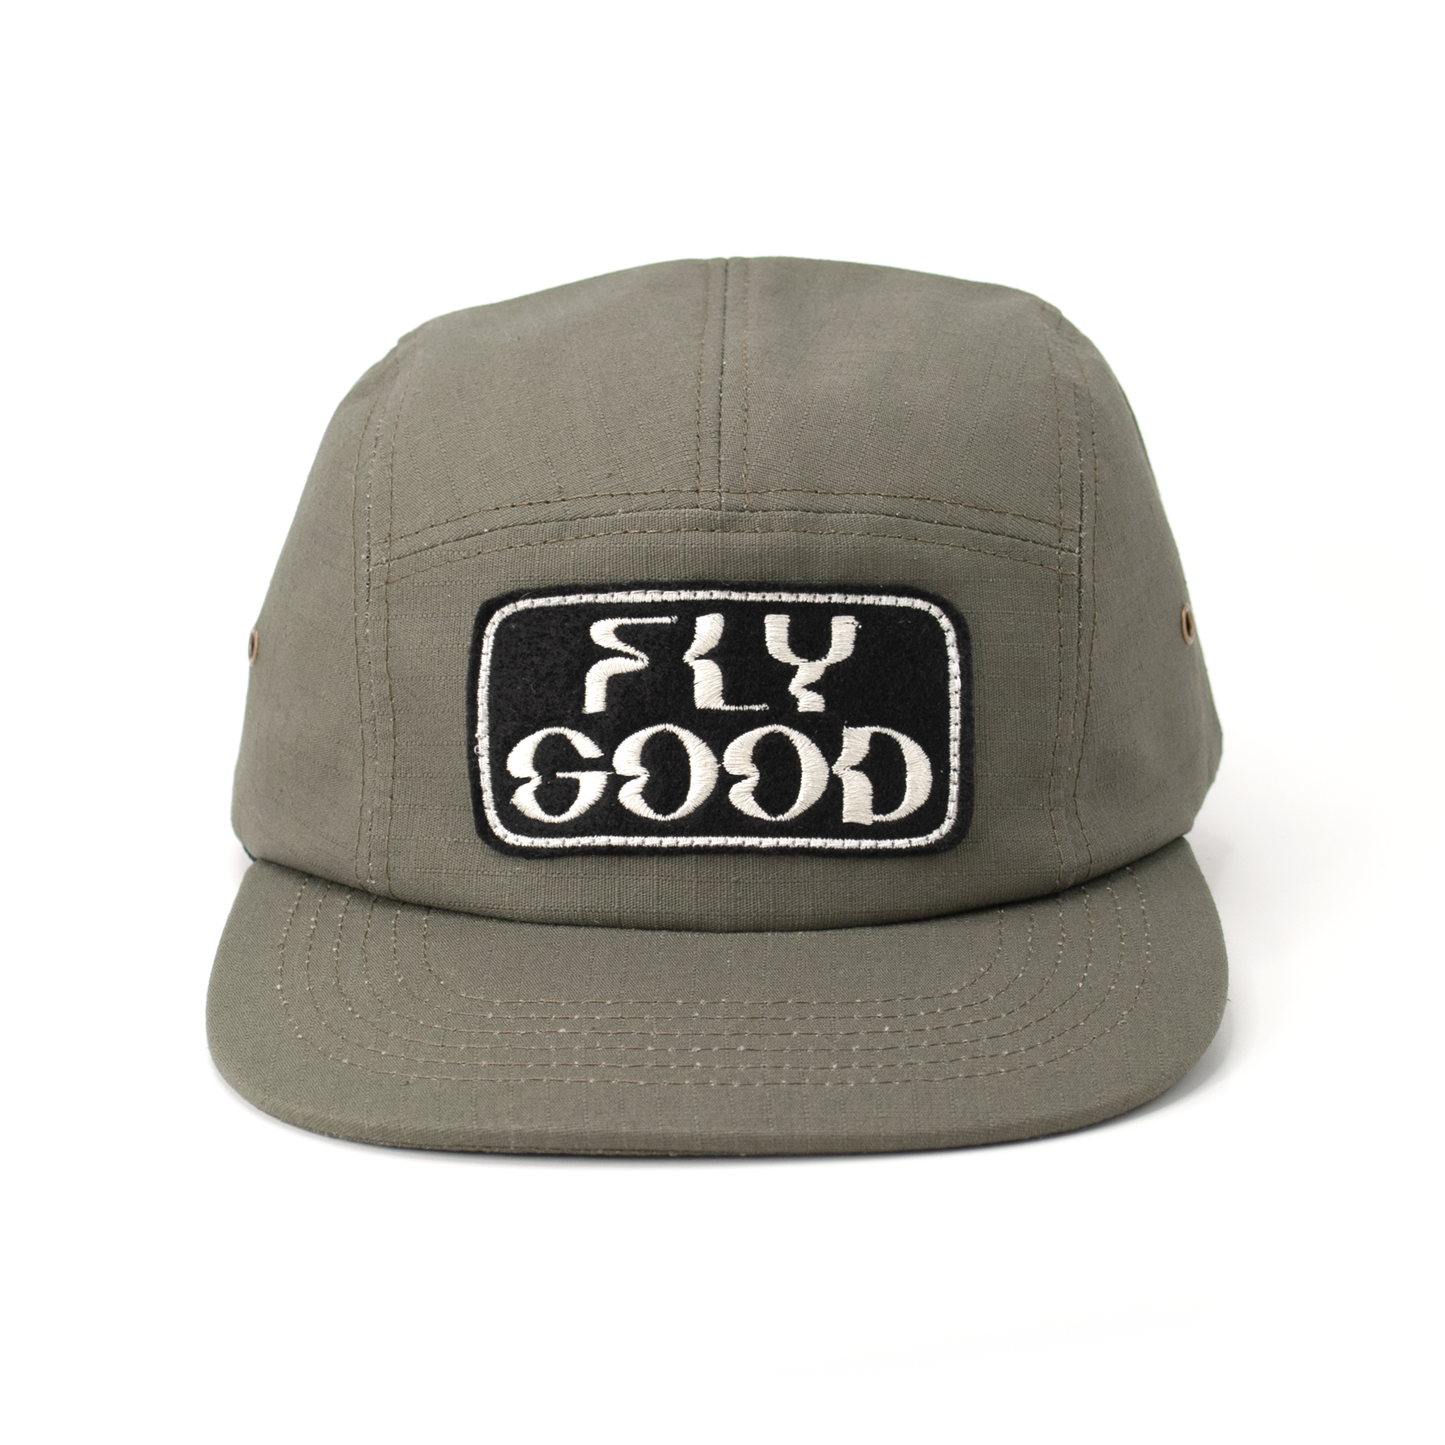 Fly Good Five Panel - Olive